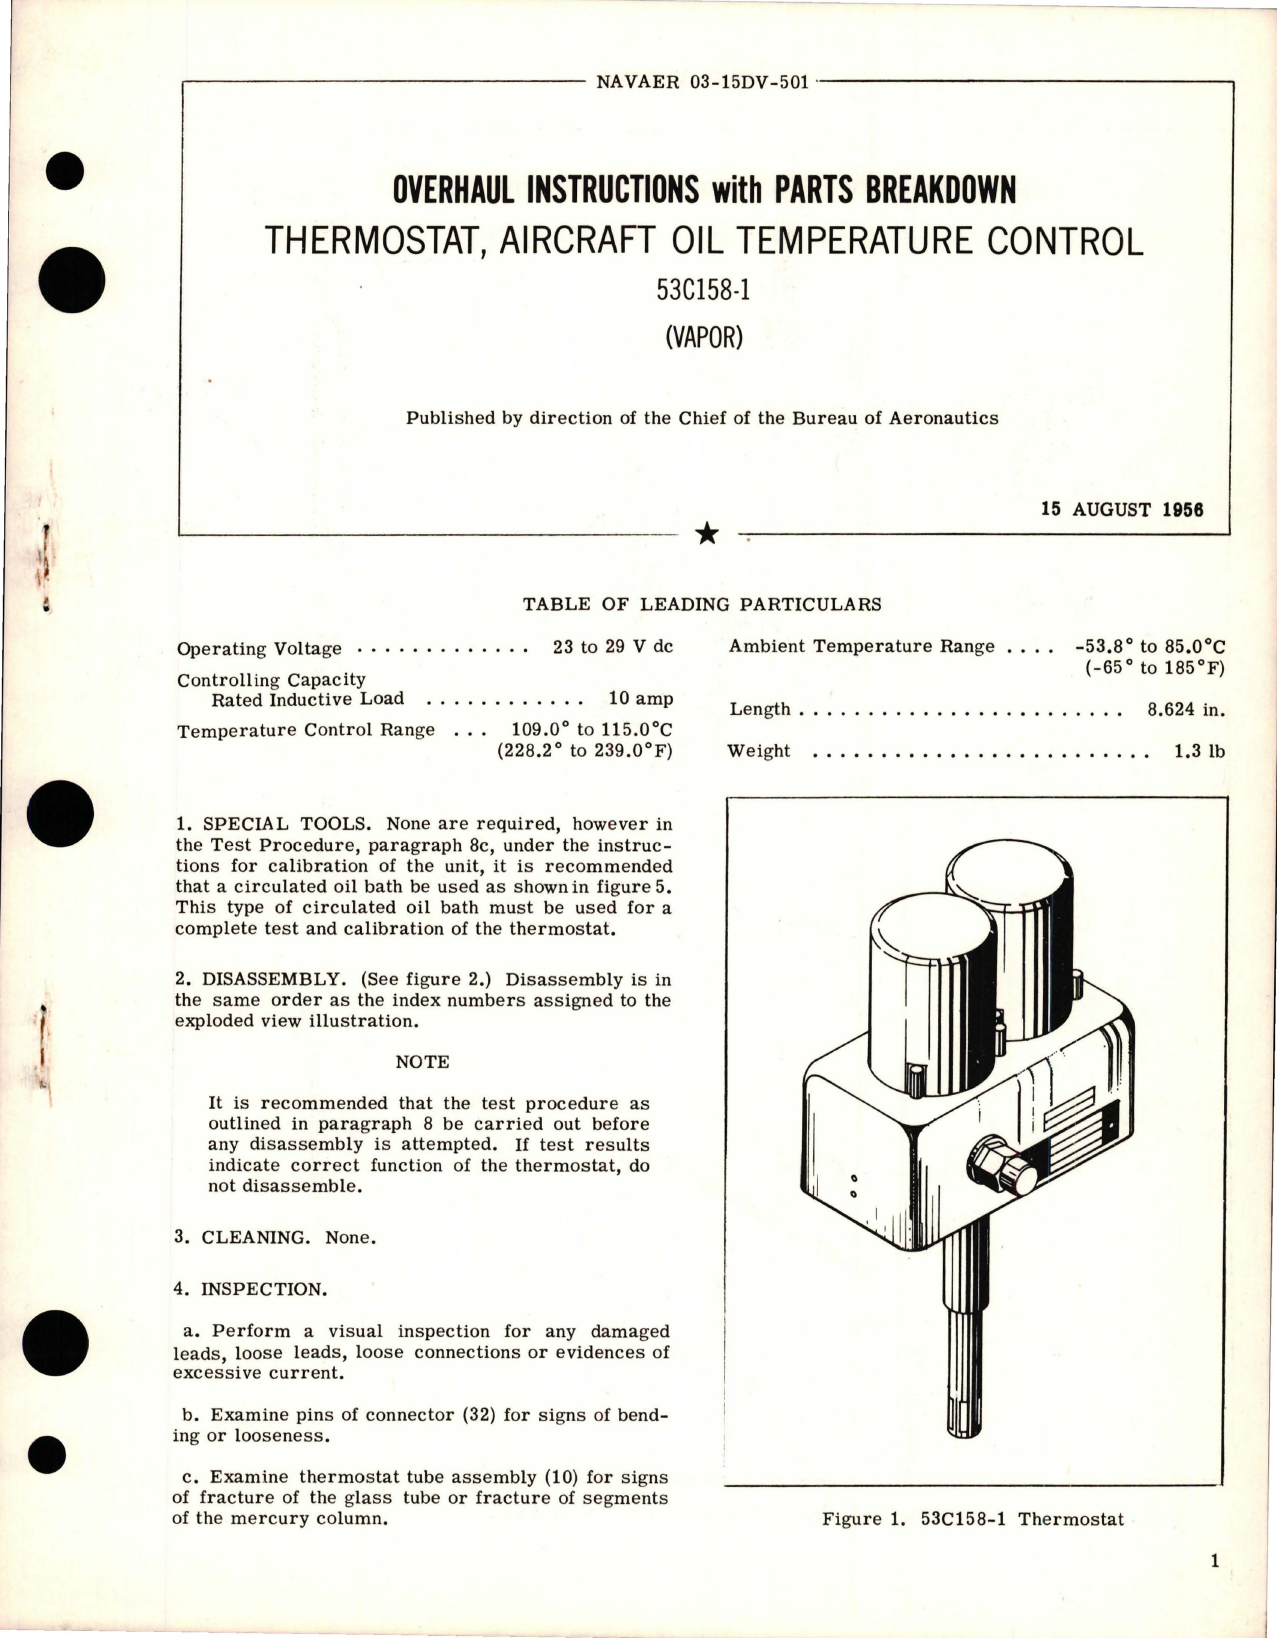 Sample page 1 from AirCorps Library document: Overhaul Instructions with Parts for Aircraft Oil Temperature Control Thermostat - 53C158-1